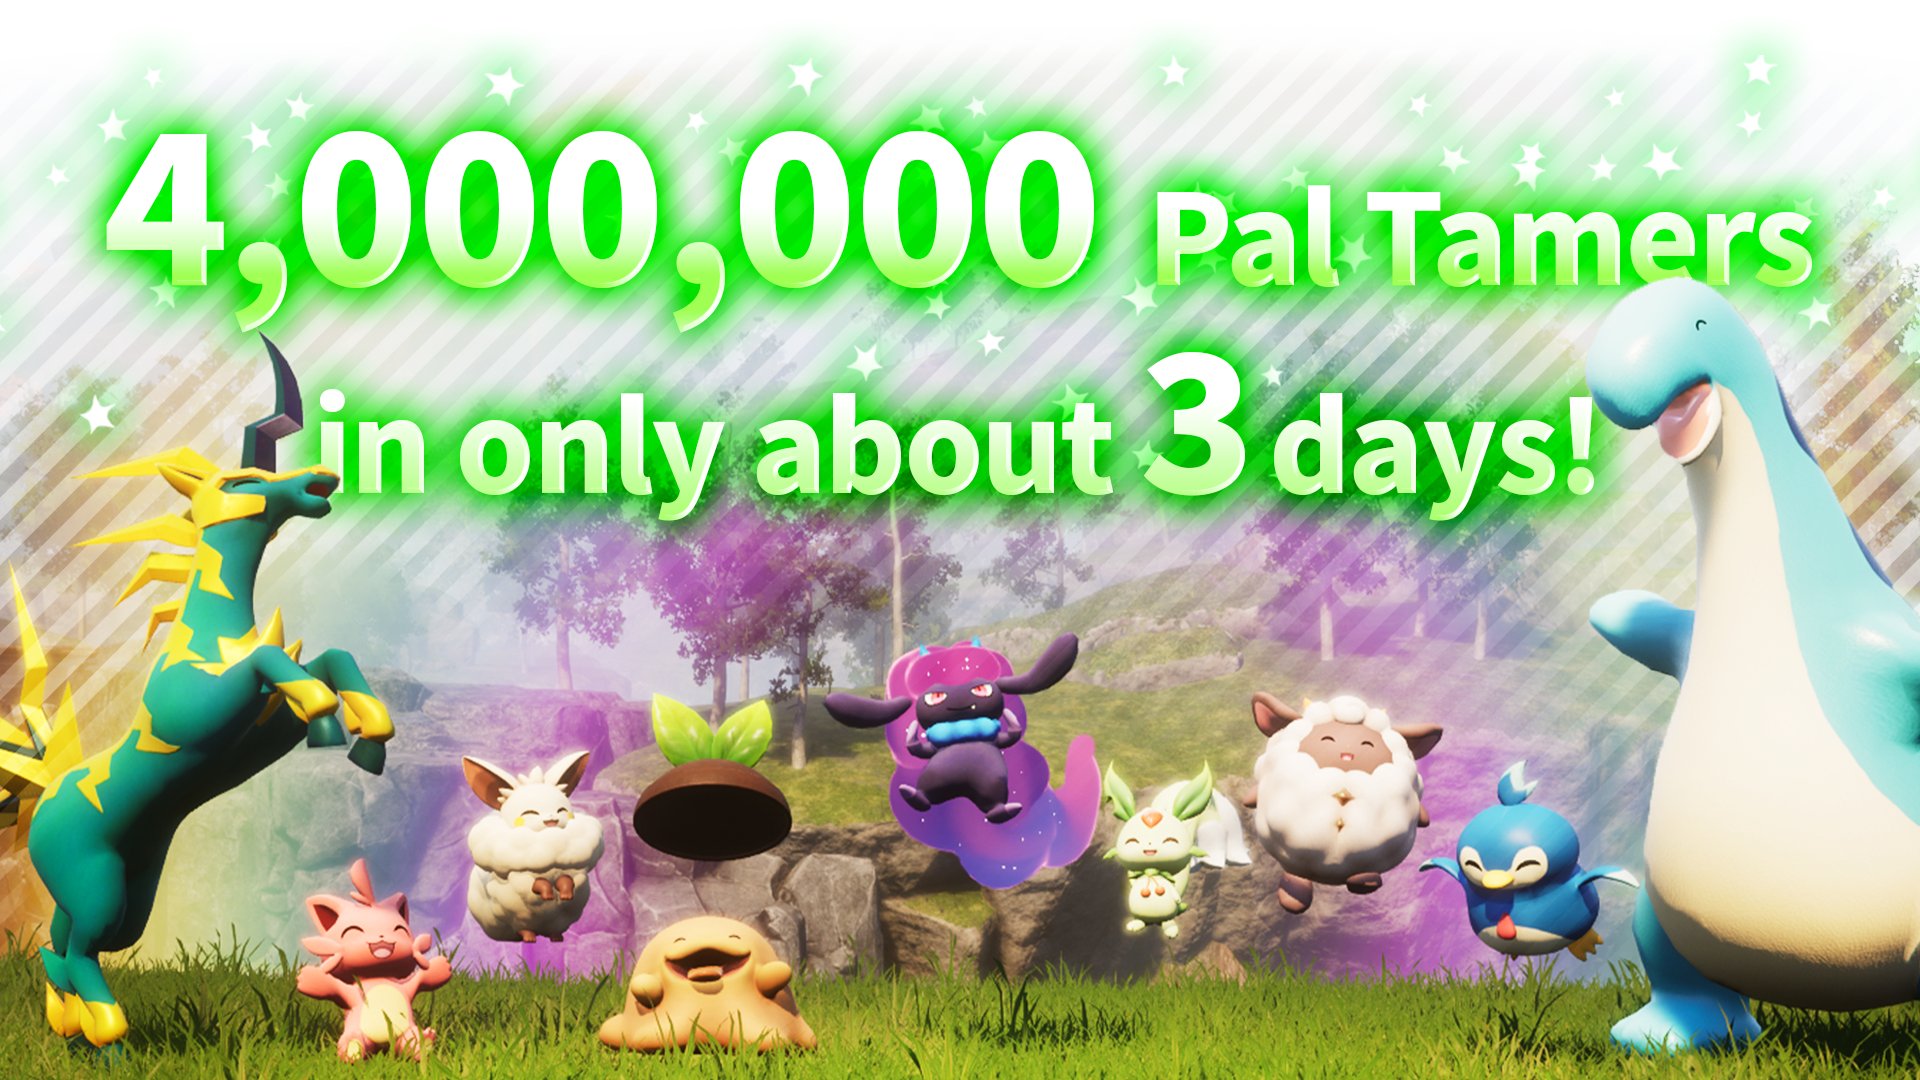 Palworld sales numbers: How many people are playing and paying?